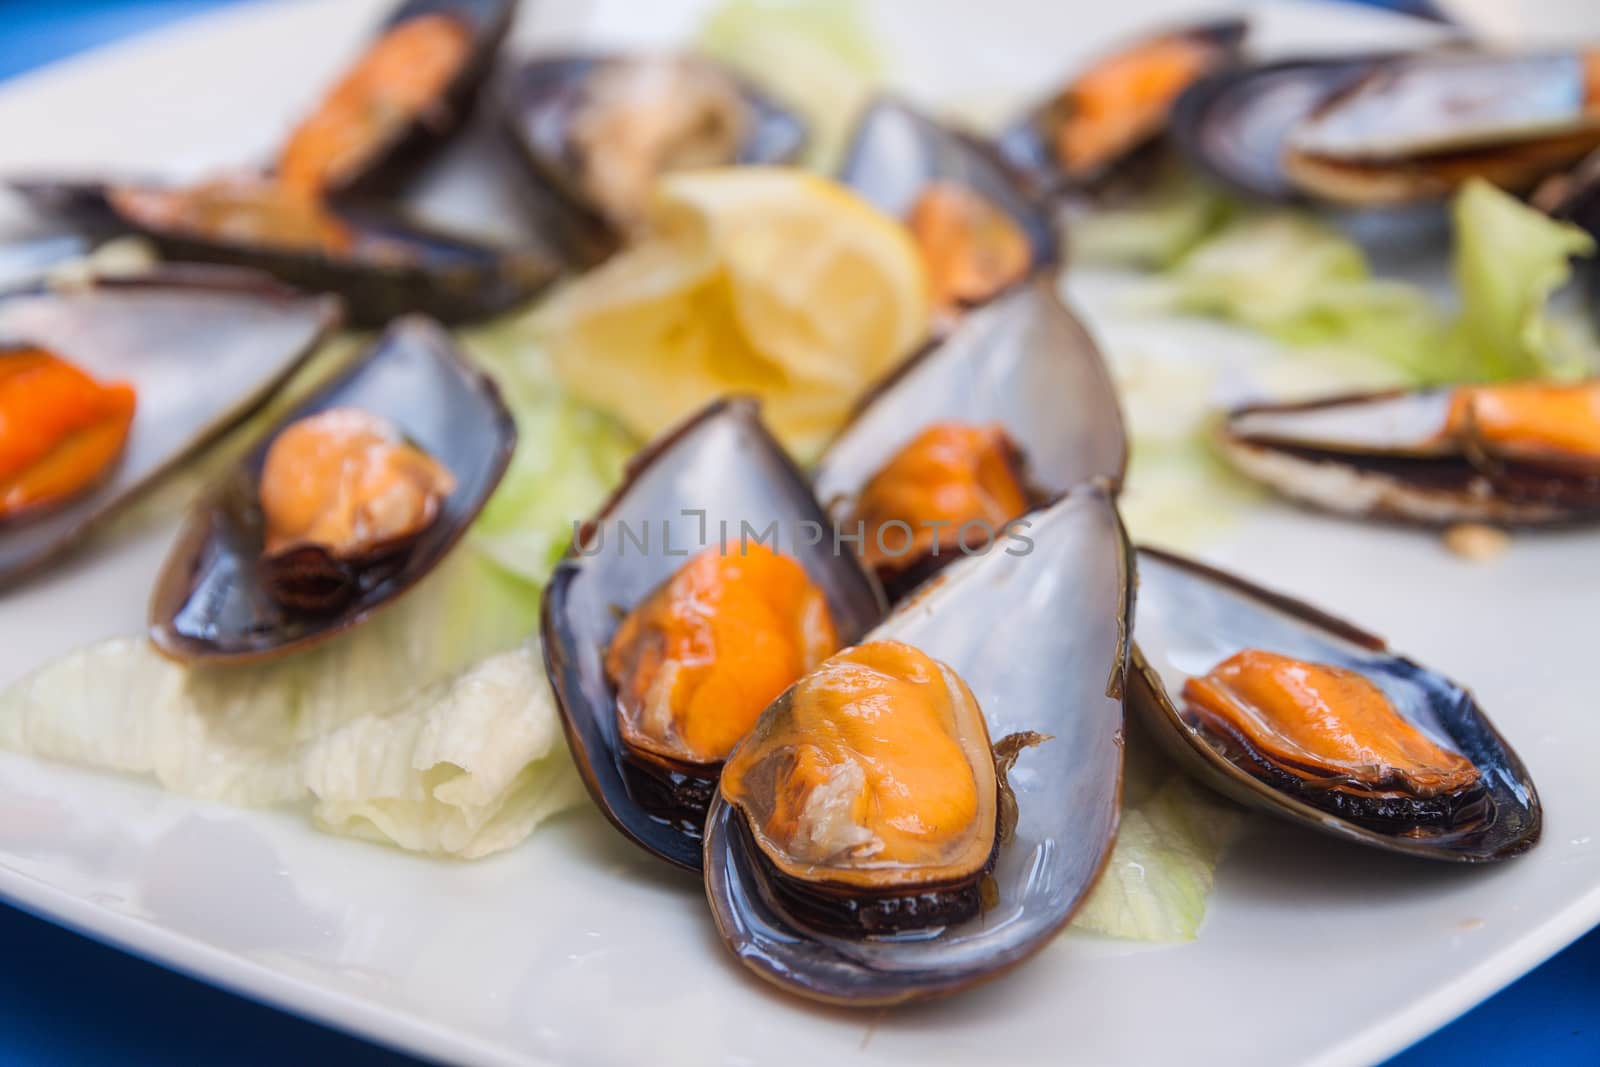  Plate of steamed mussels with lettuce leaves and lemon